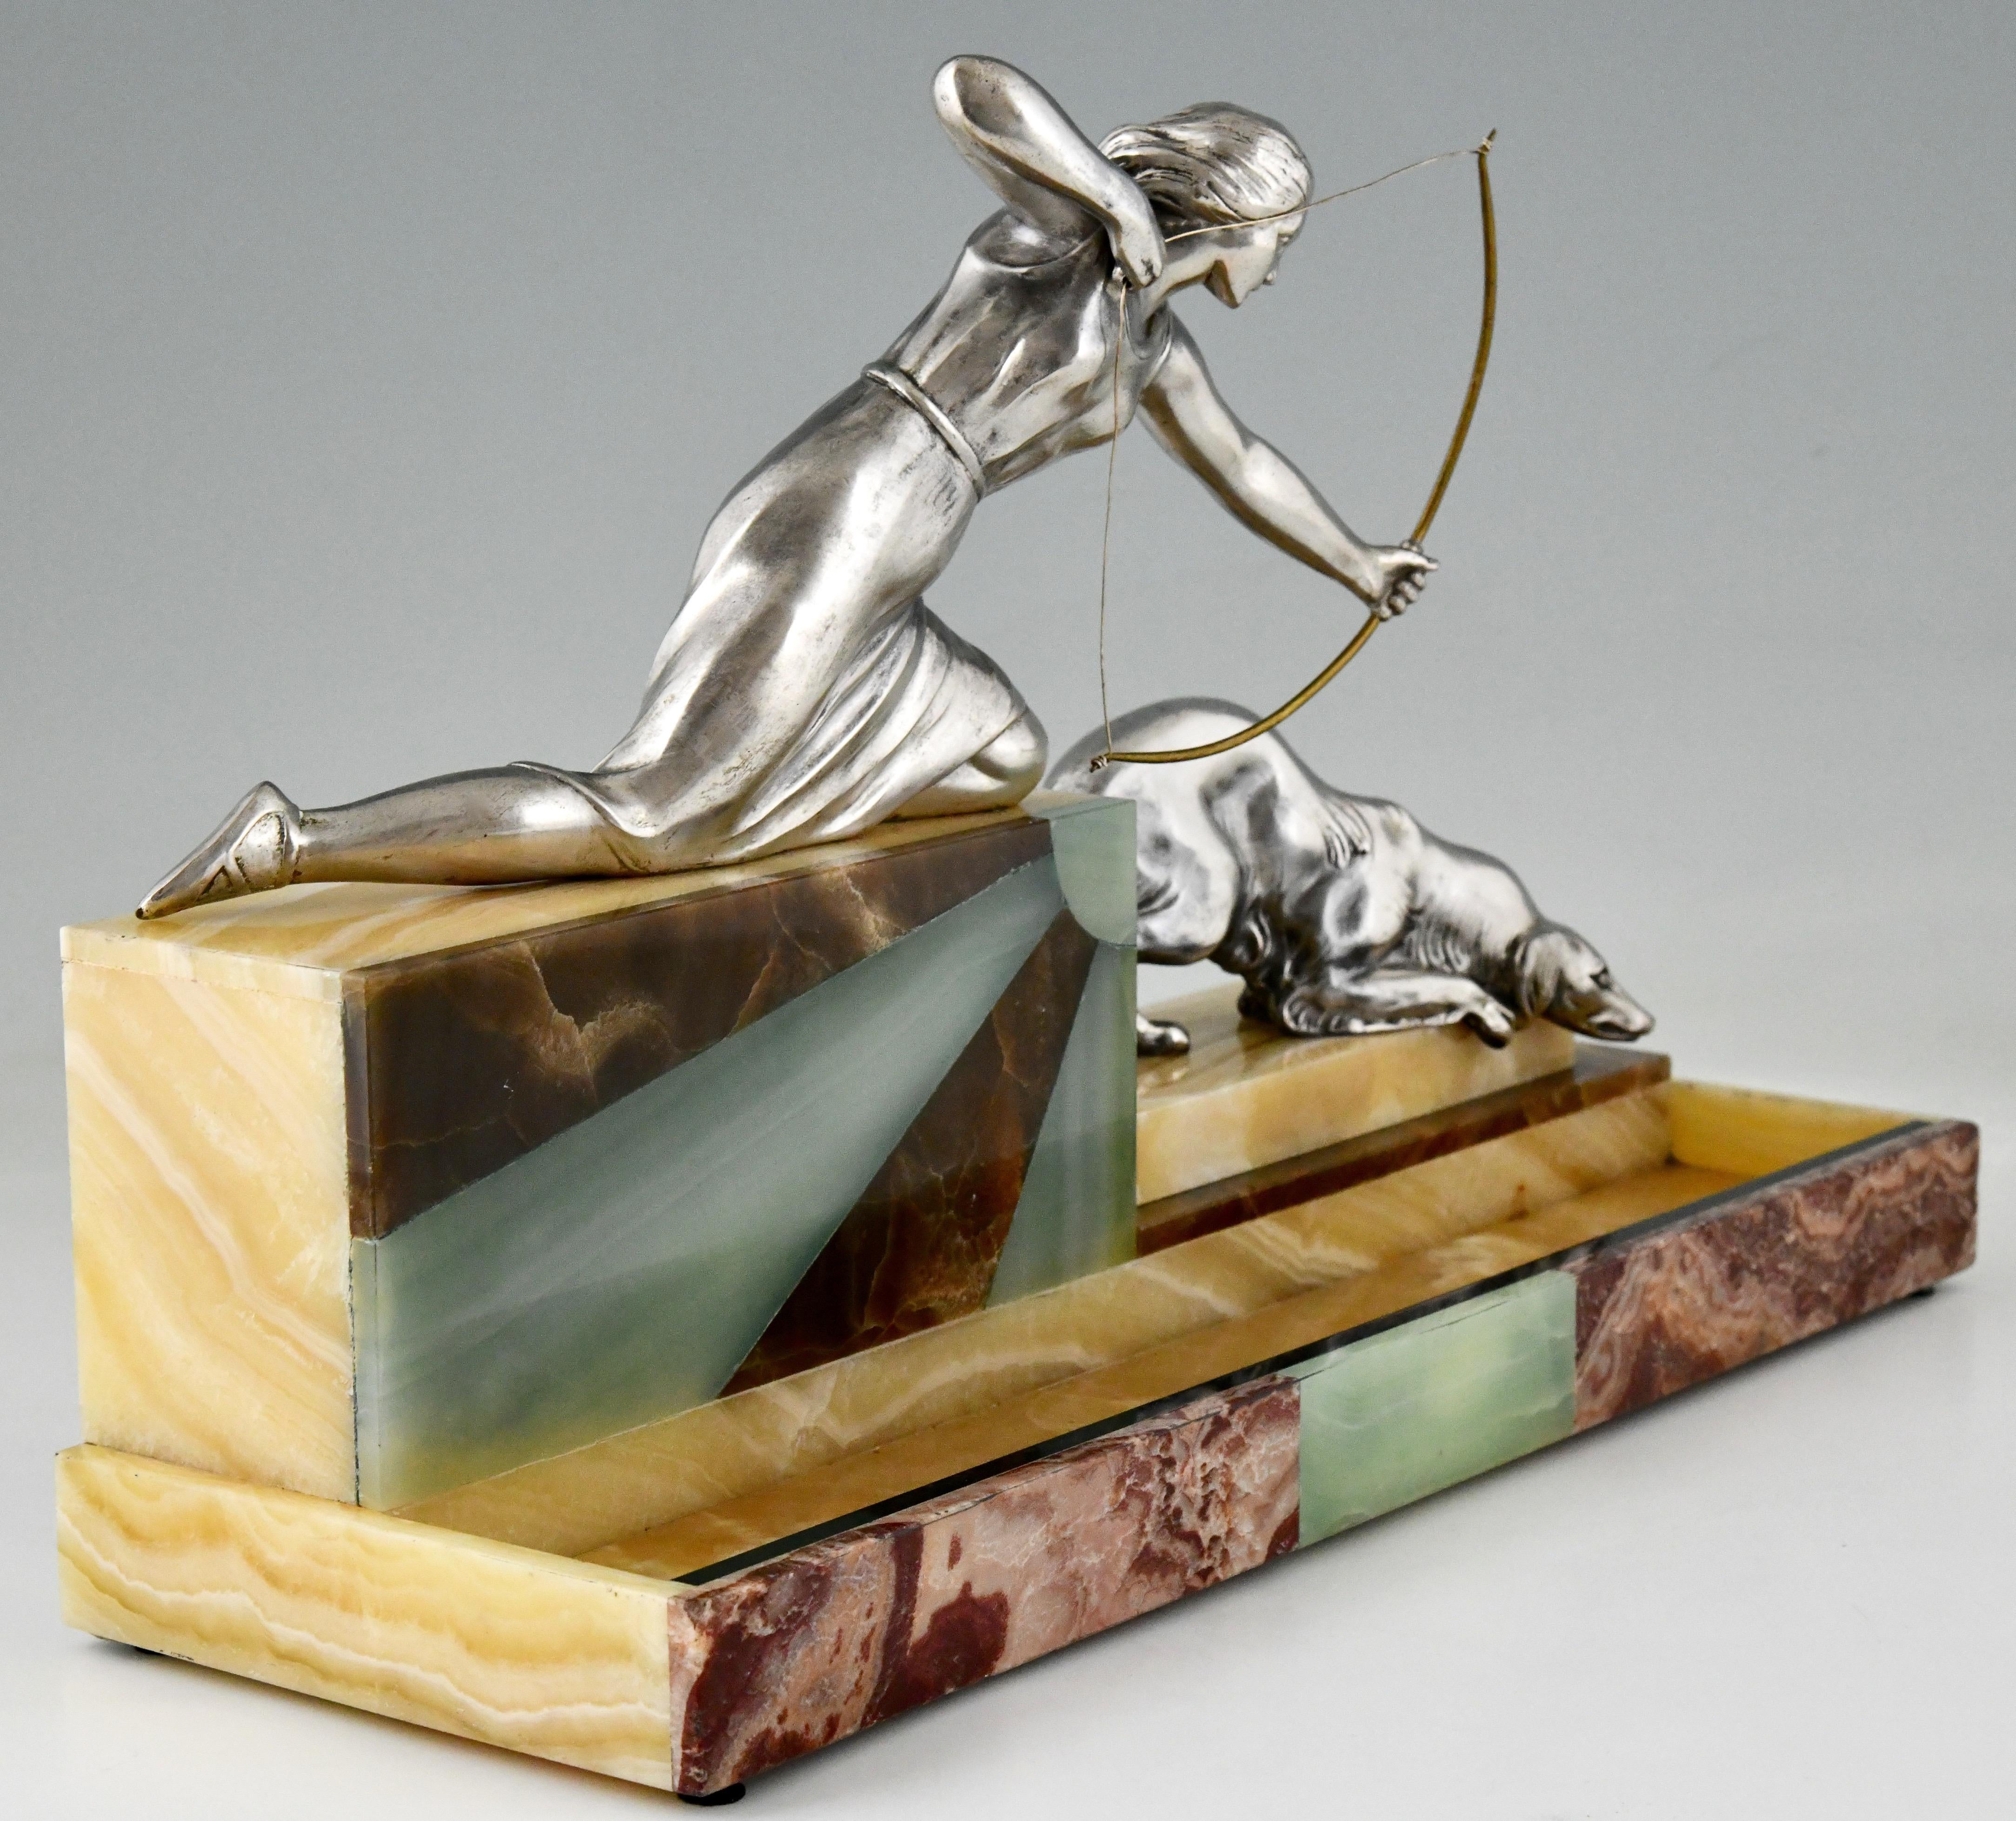 French Art Deco sculptural tray Diana the huntress by Leclerc, France 1930